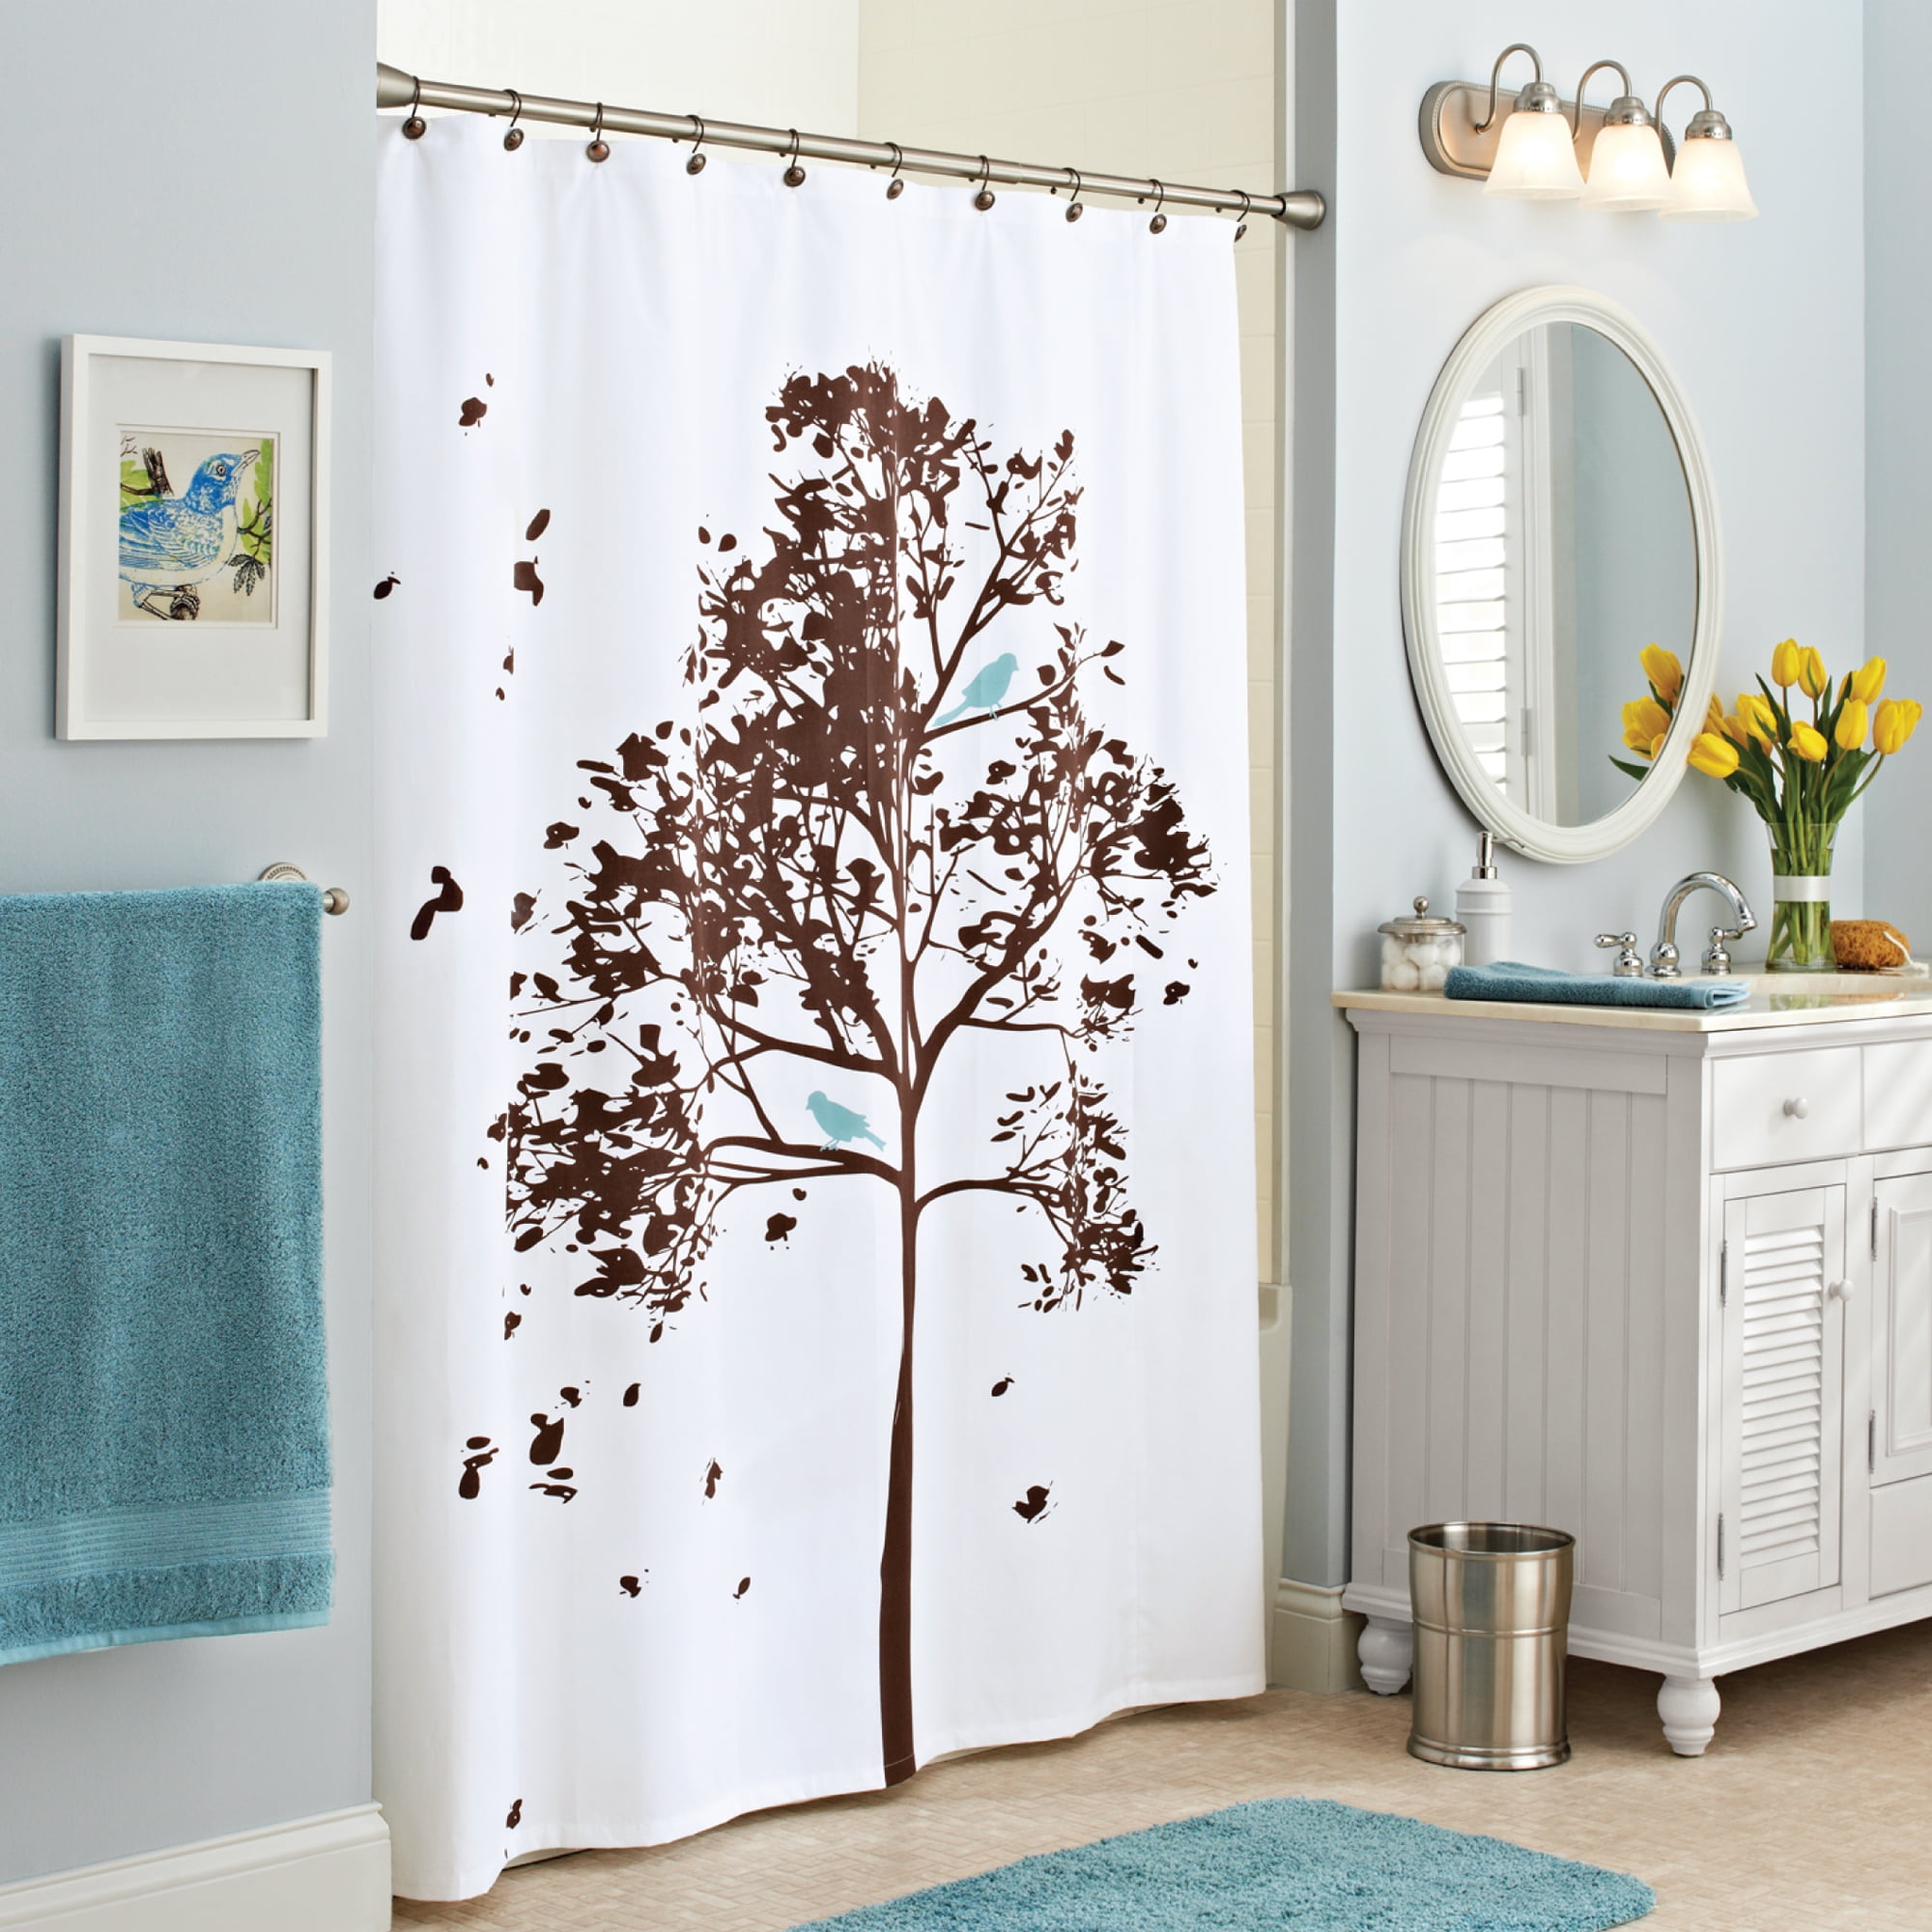 Details about   Tree Shower Curtain Large Maple with River Print for Bathroom 